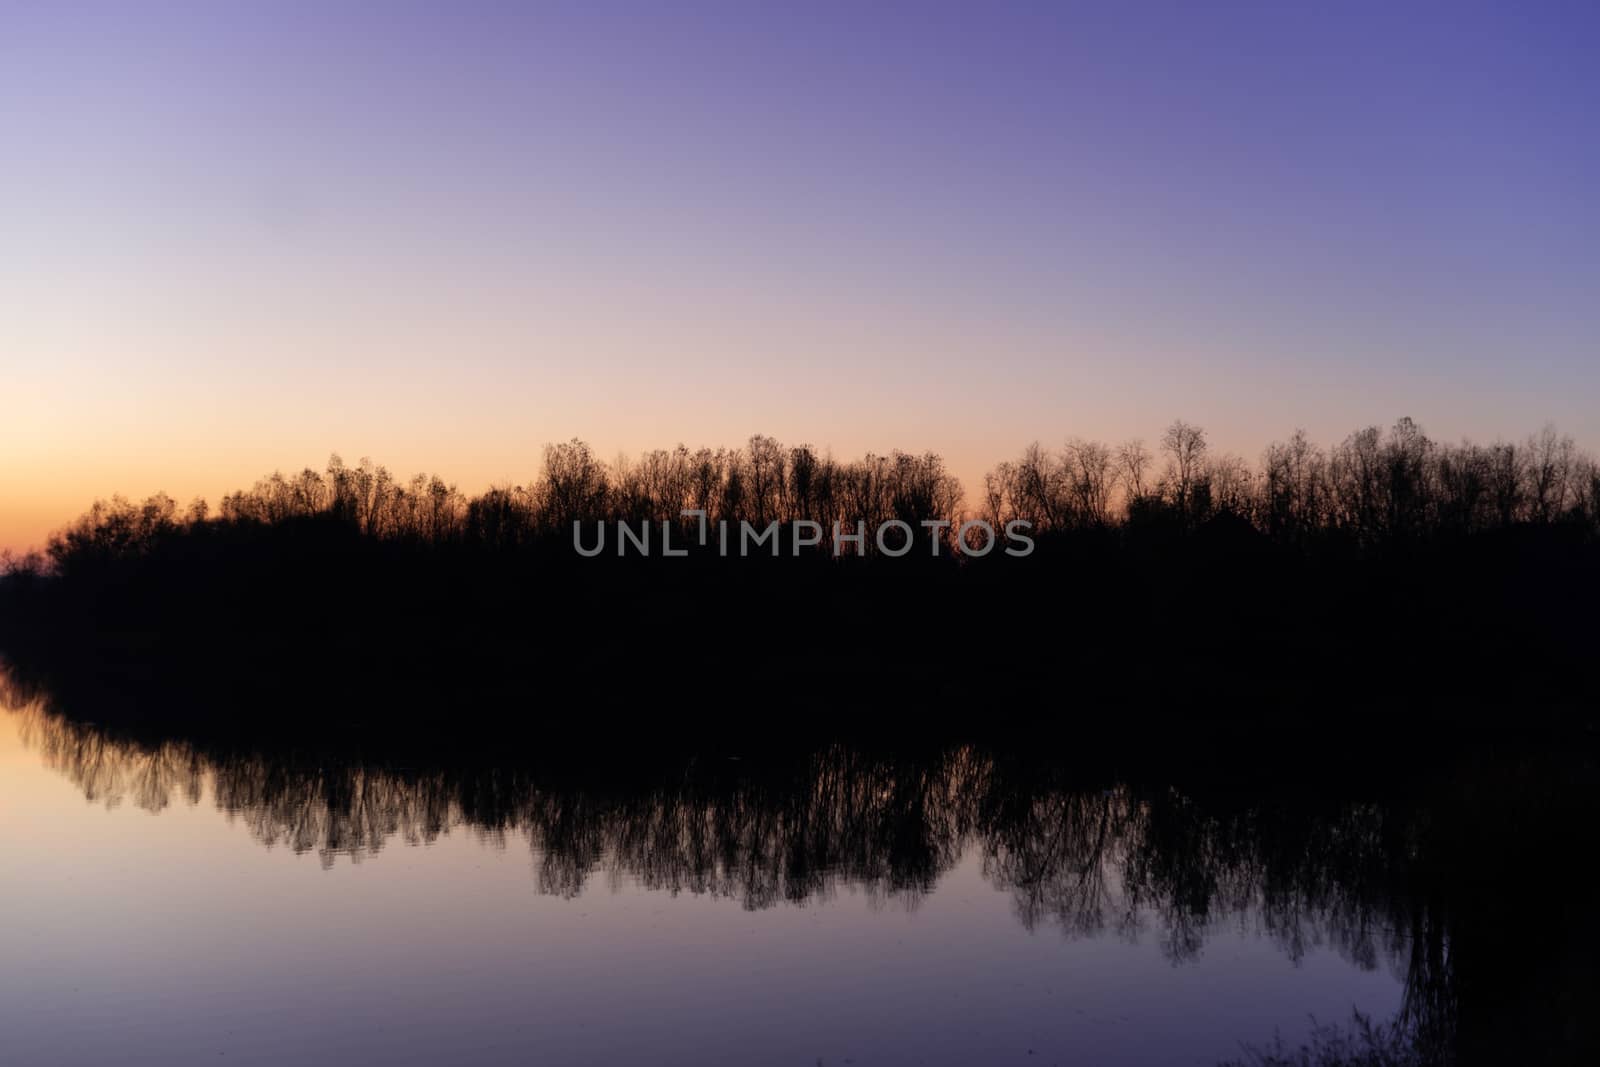 Blue time evening sky landscape with trees and lake in foreground. Blue time sunset. Perfect teal and orange colors. Low-light underexposed photo. by alexsdriver